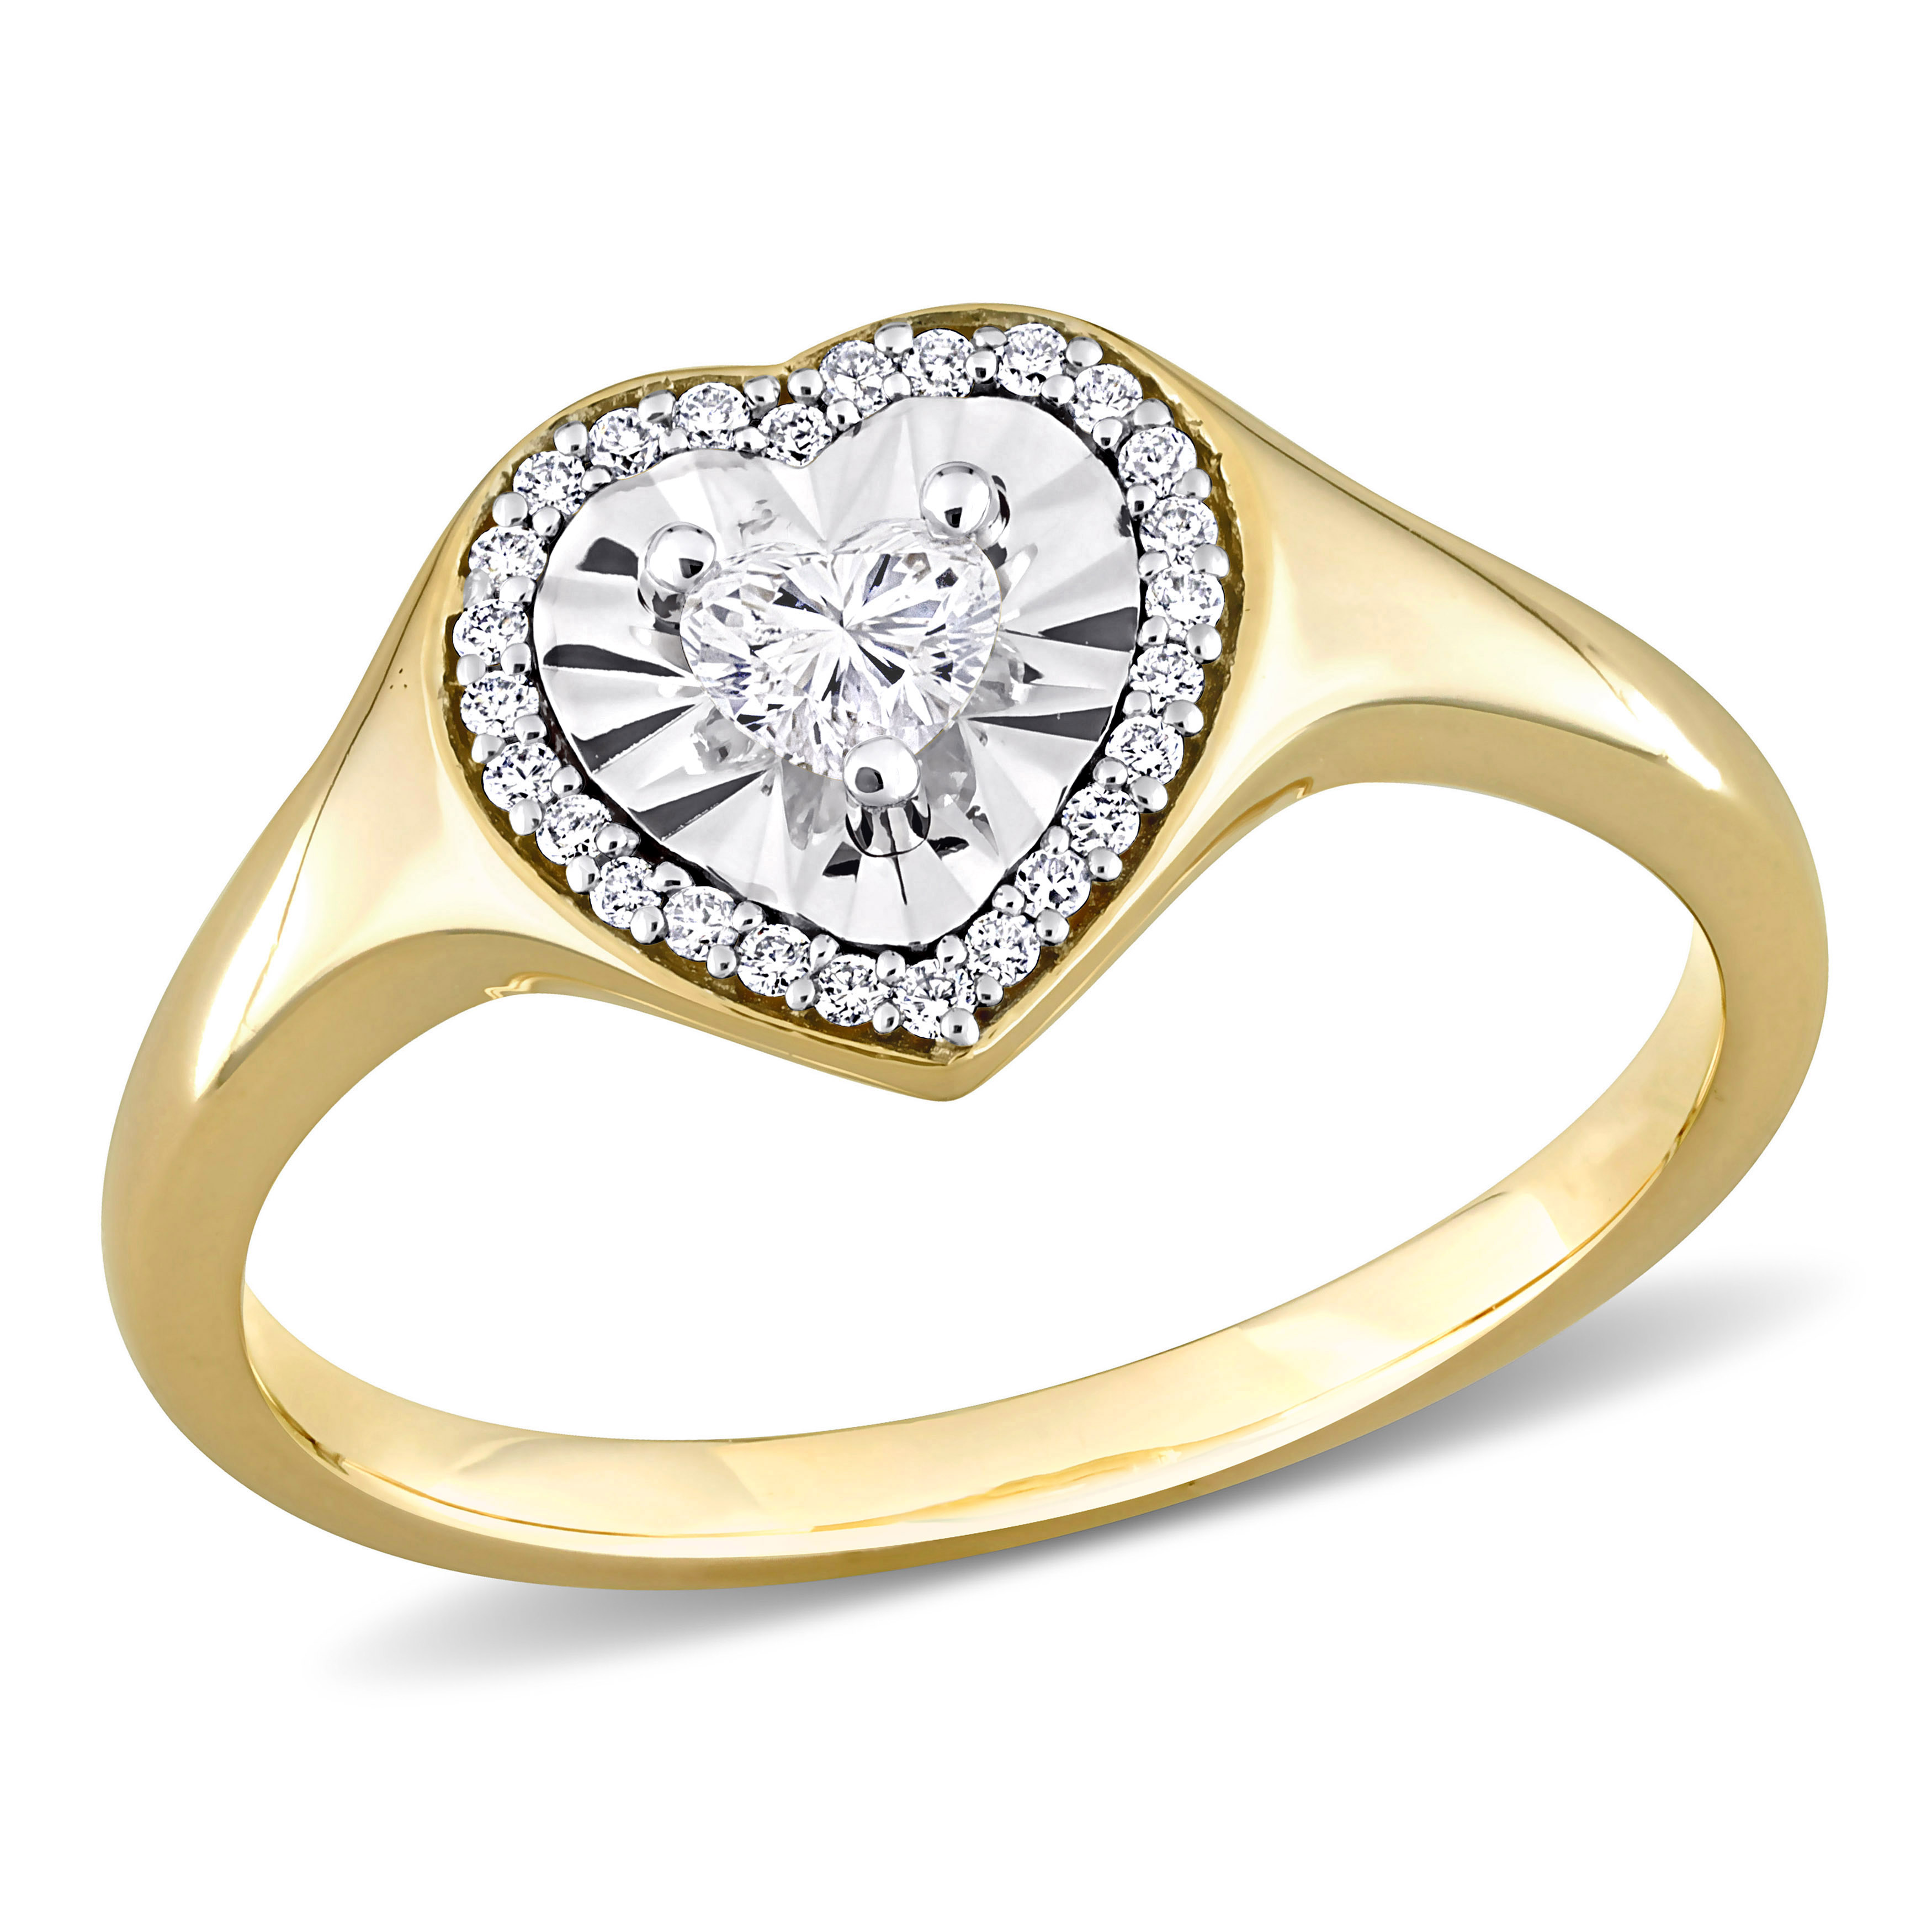 1/4 CT TW Heart & Round Shape Diamond Halo Engagement Ring in 14k Yellow Gold